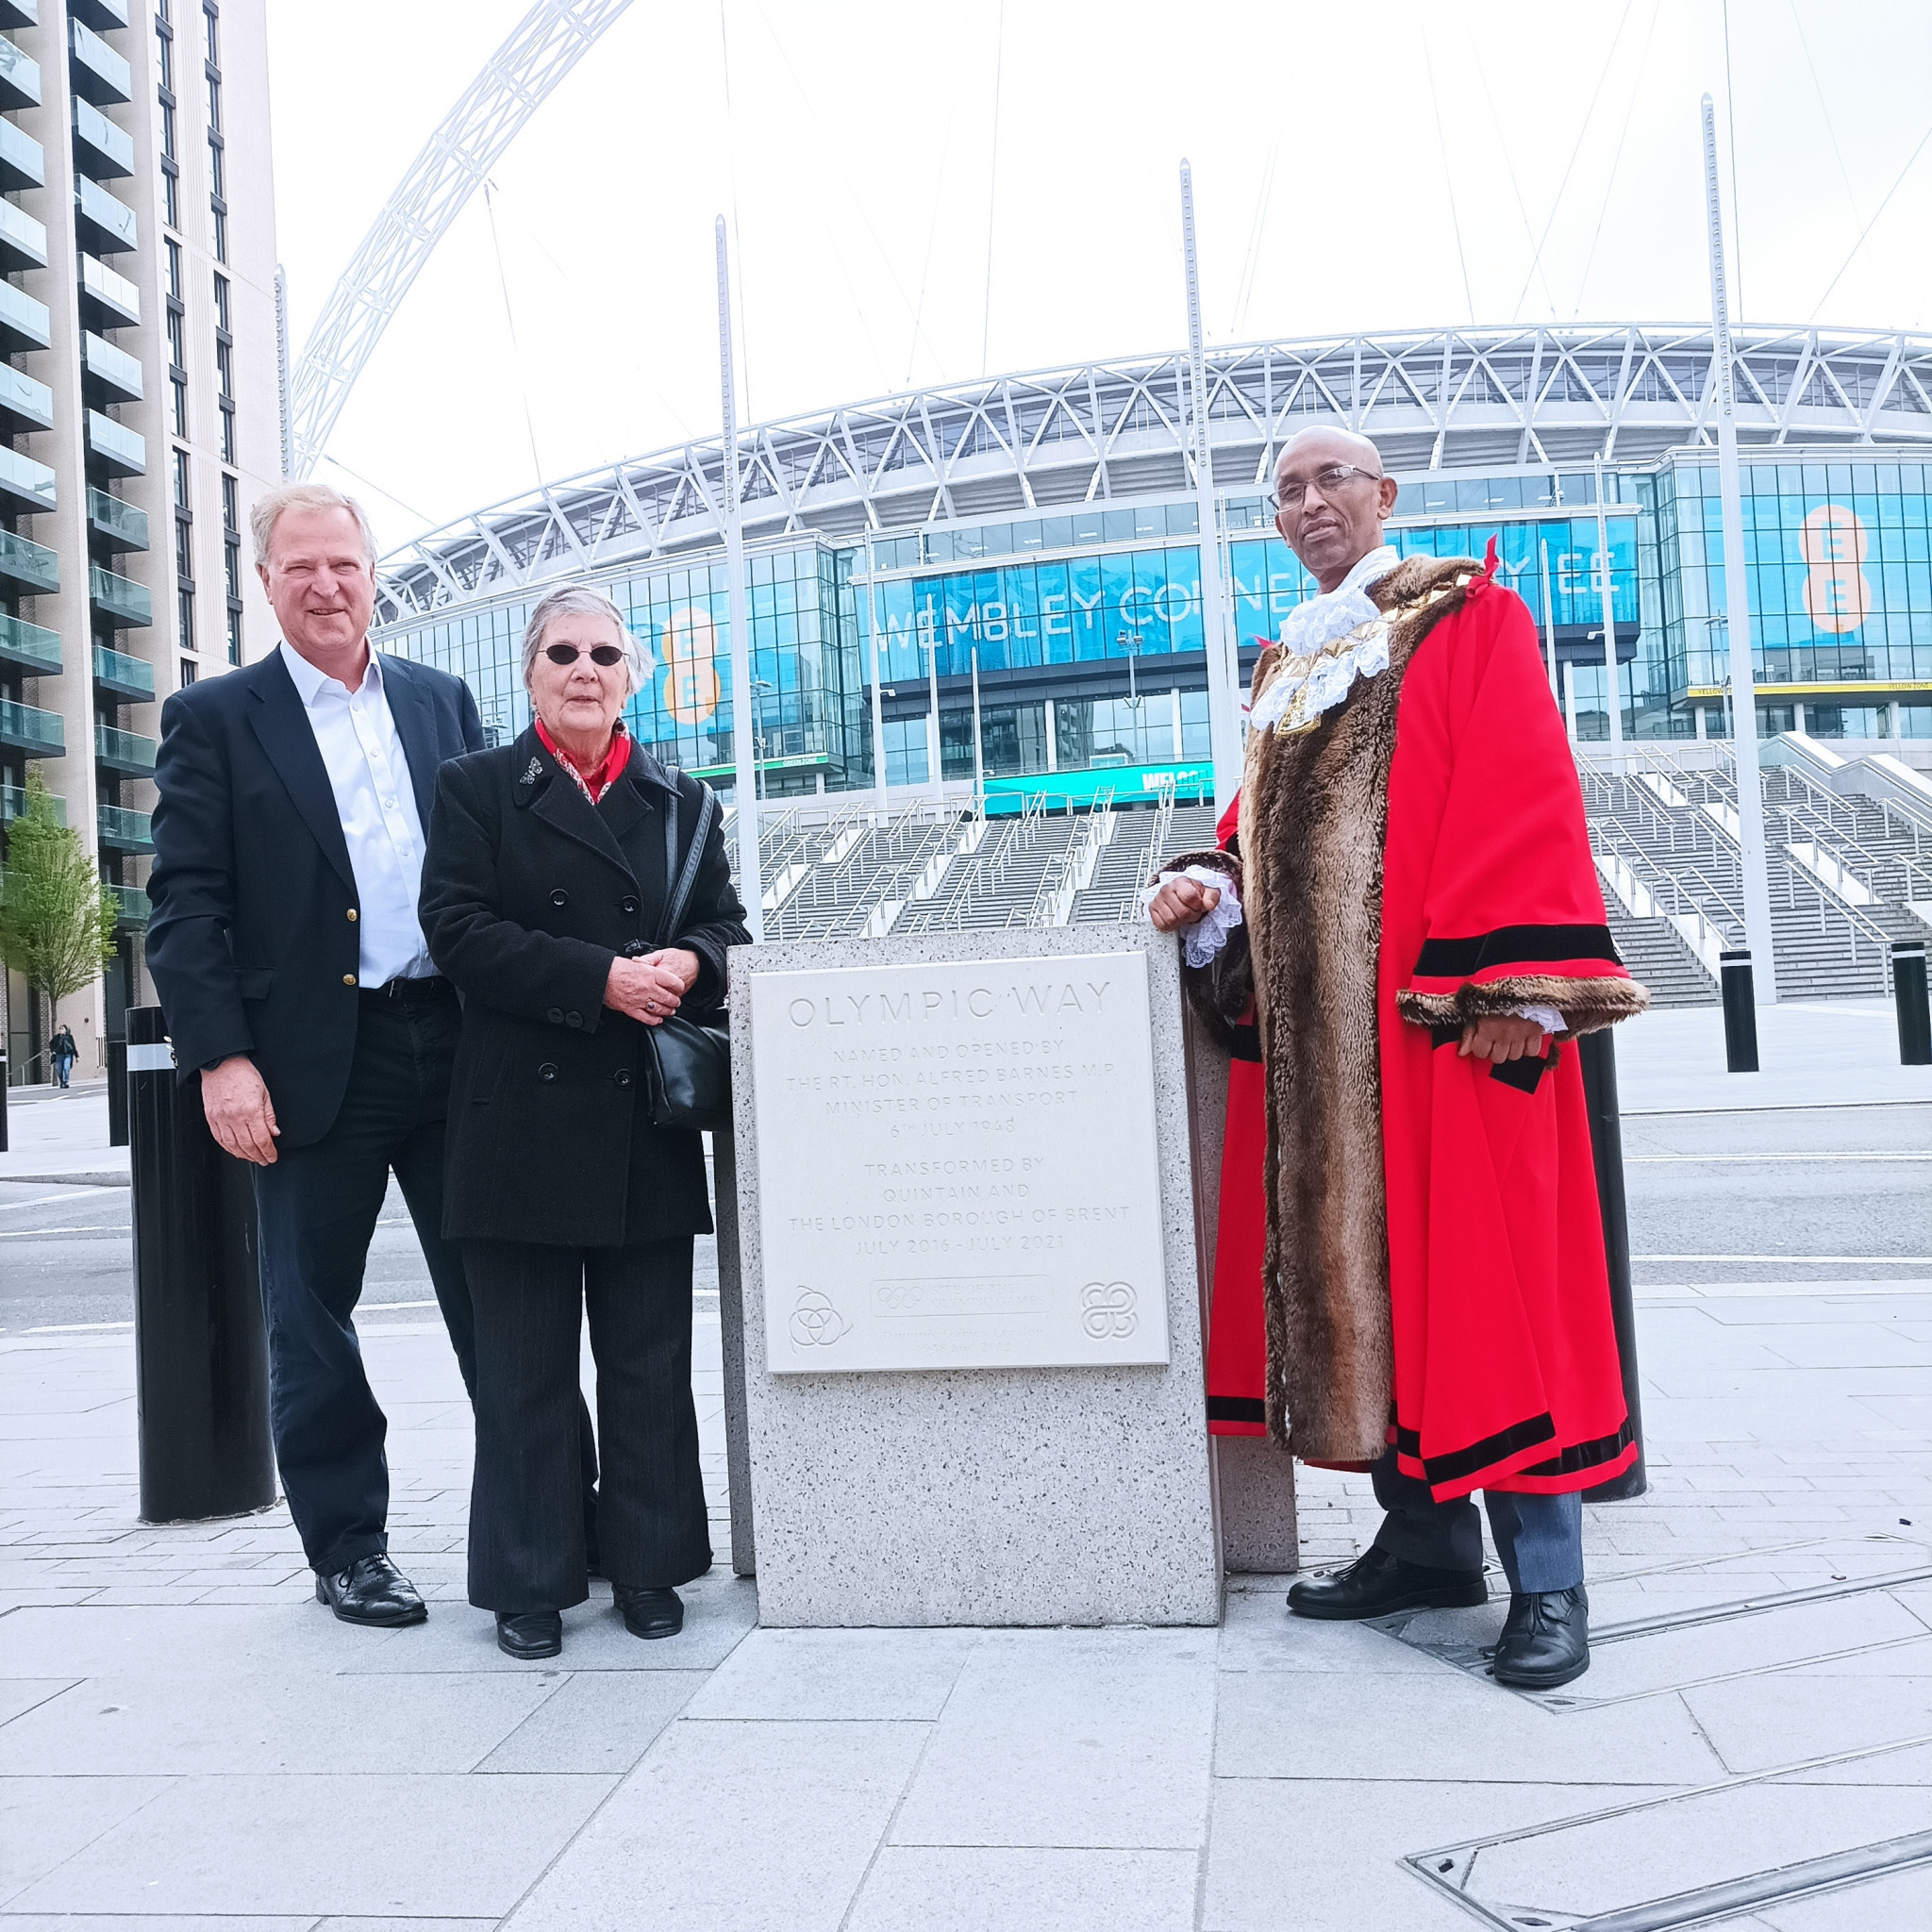 A new plaque was unveiled at Wembley to commemorate 75 years since the Olympic Way was opened ©ITG